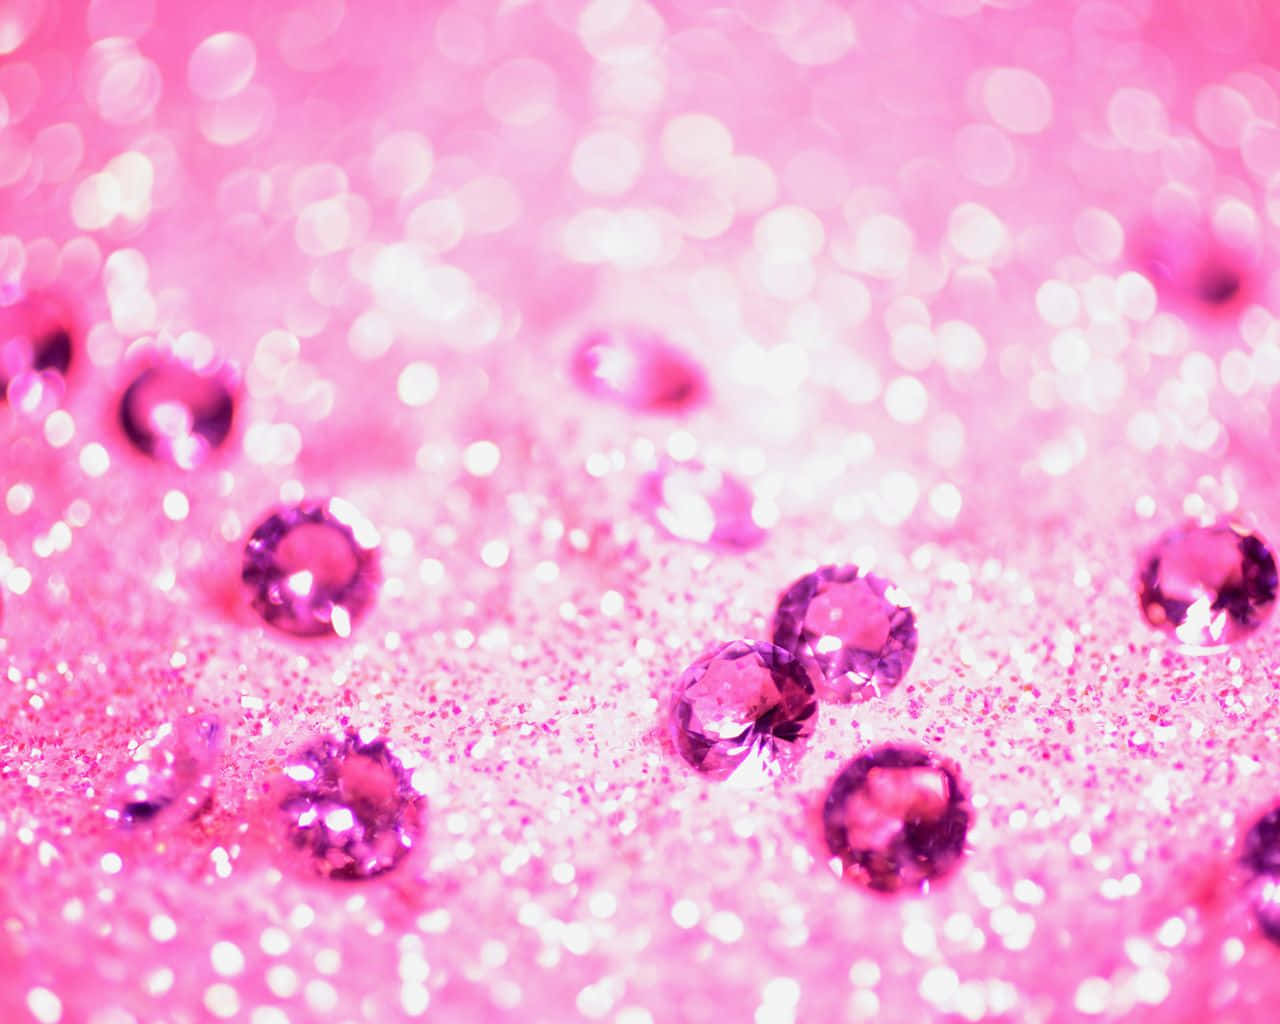 Shine Brightly with a Sparkly Background